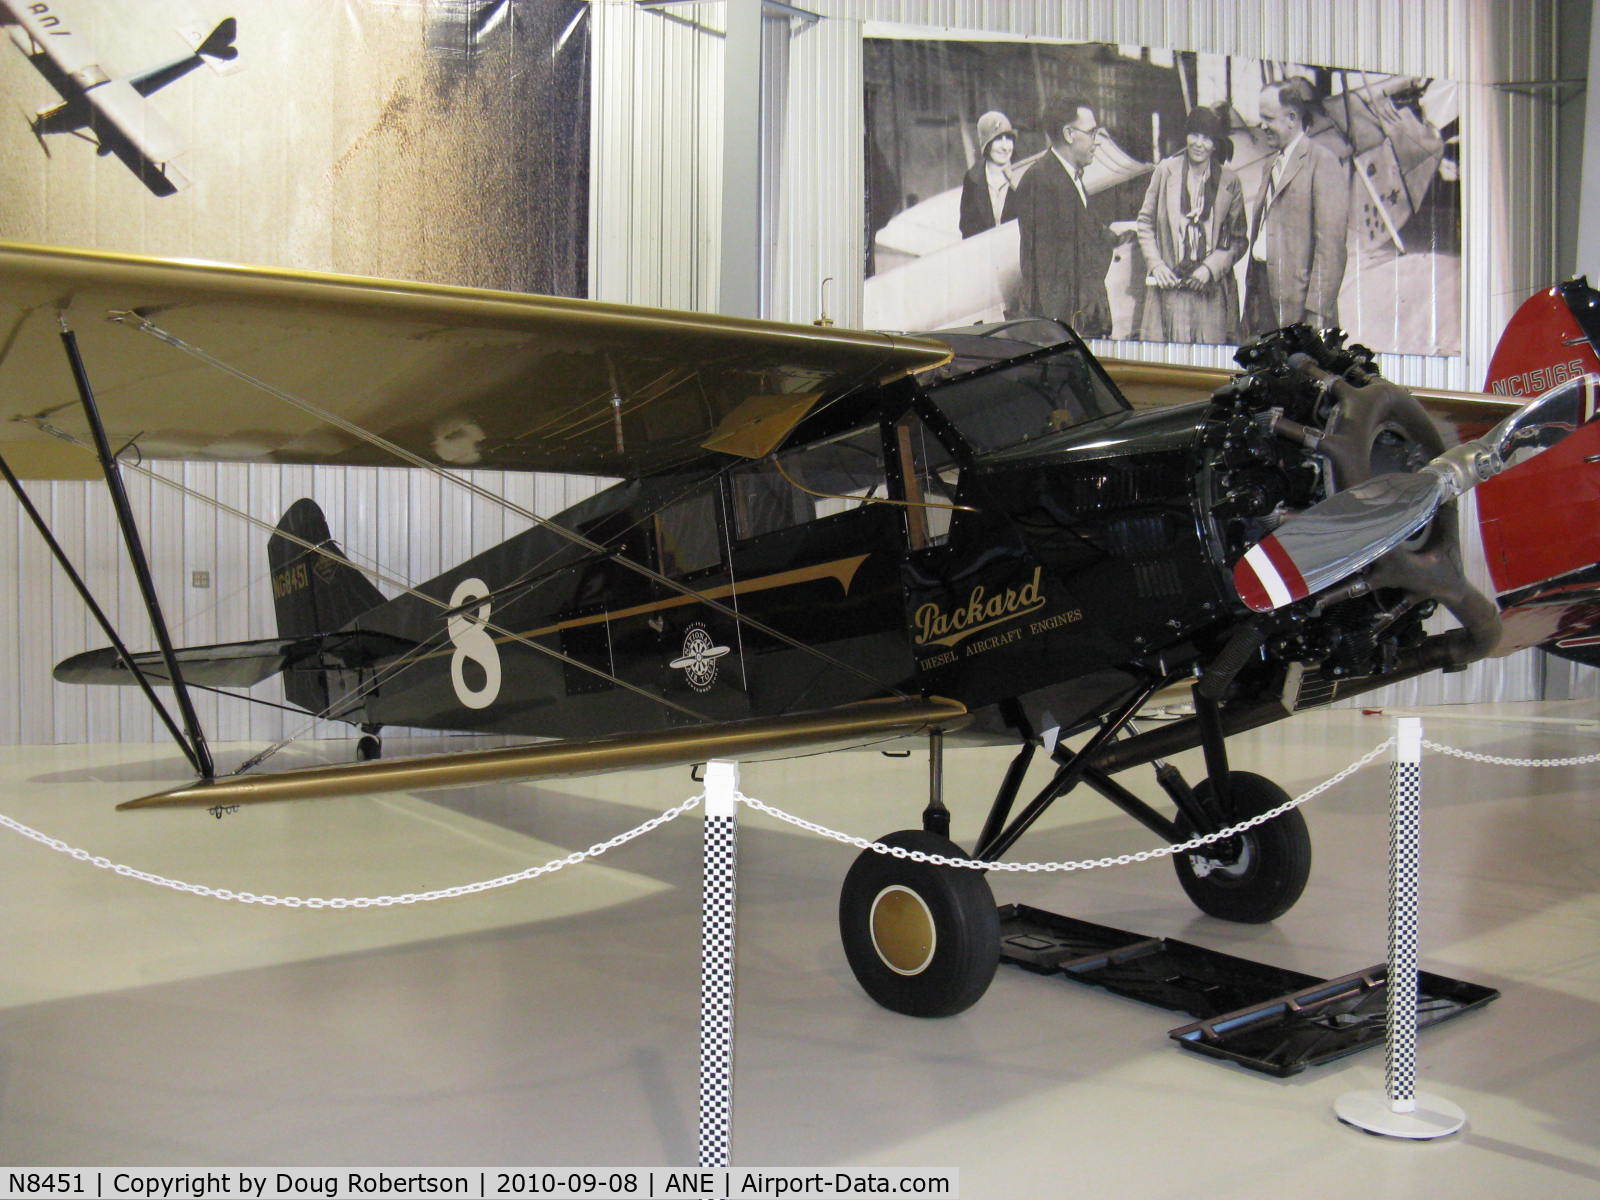 N8451, 1929 Buhl CA-3E C/N 57, 1929 Buhl CA-3E SPORT AIRSEDAN, Curtiss-Wright R-975-28 derated to 330 Hp, at Golden Wings Museum